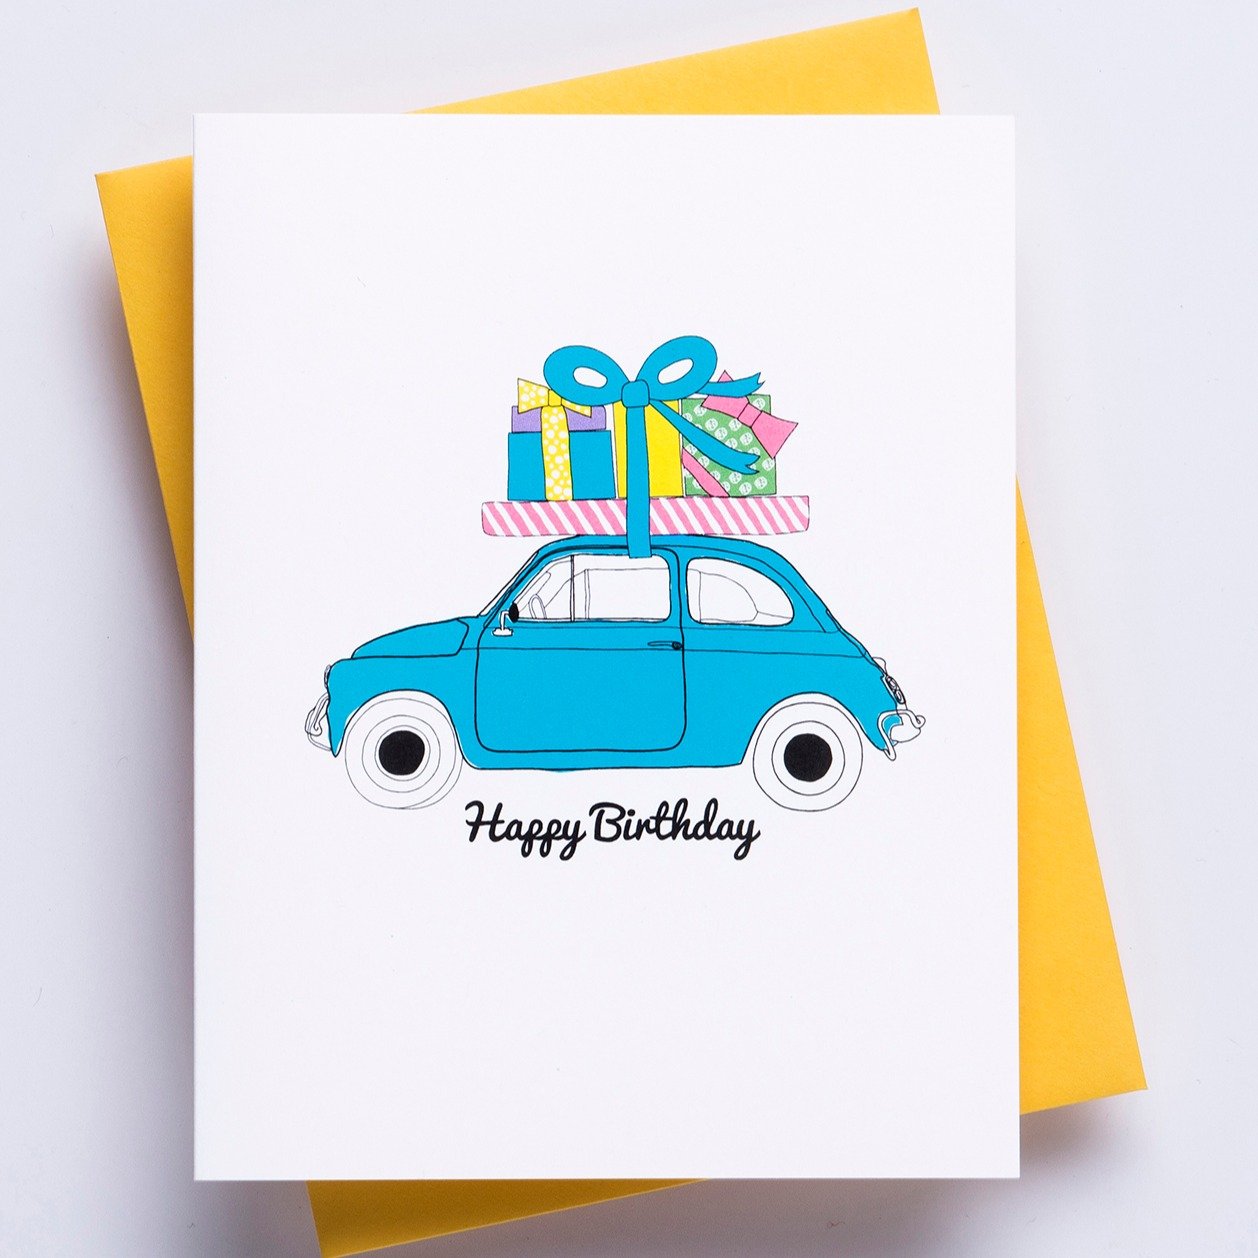 Happy Birthday Moto Greeting Card - A white greeting card with a image of a small car carrying birthday gifts on the roof and the words 'happy birthday' accompanied by a bright yellow envelope.